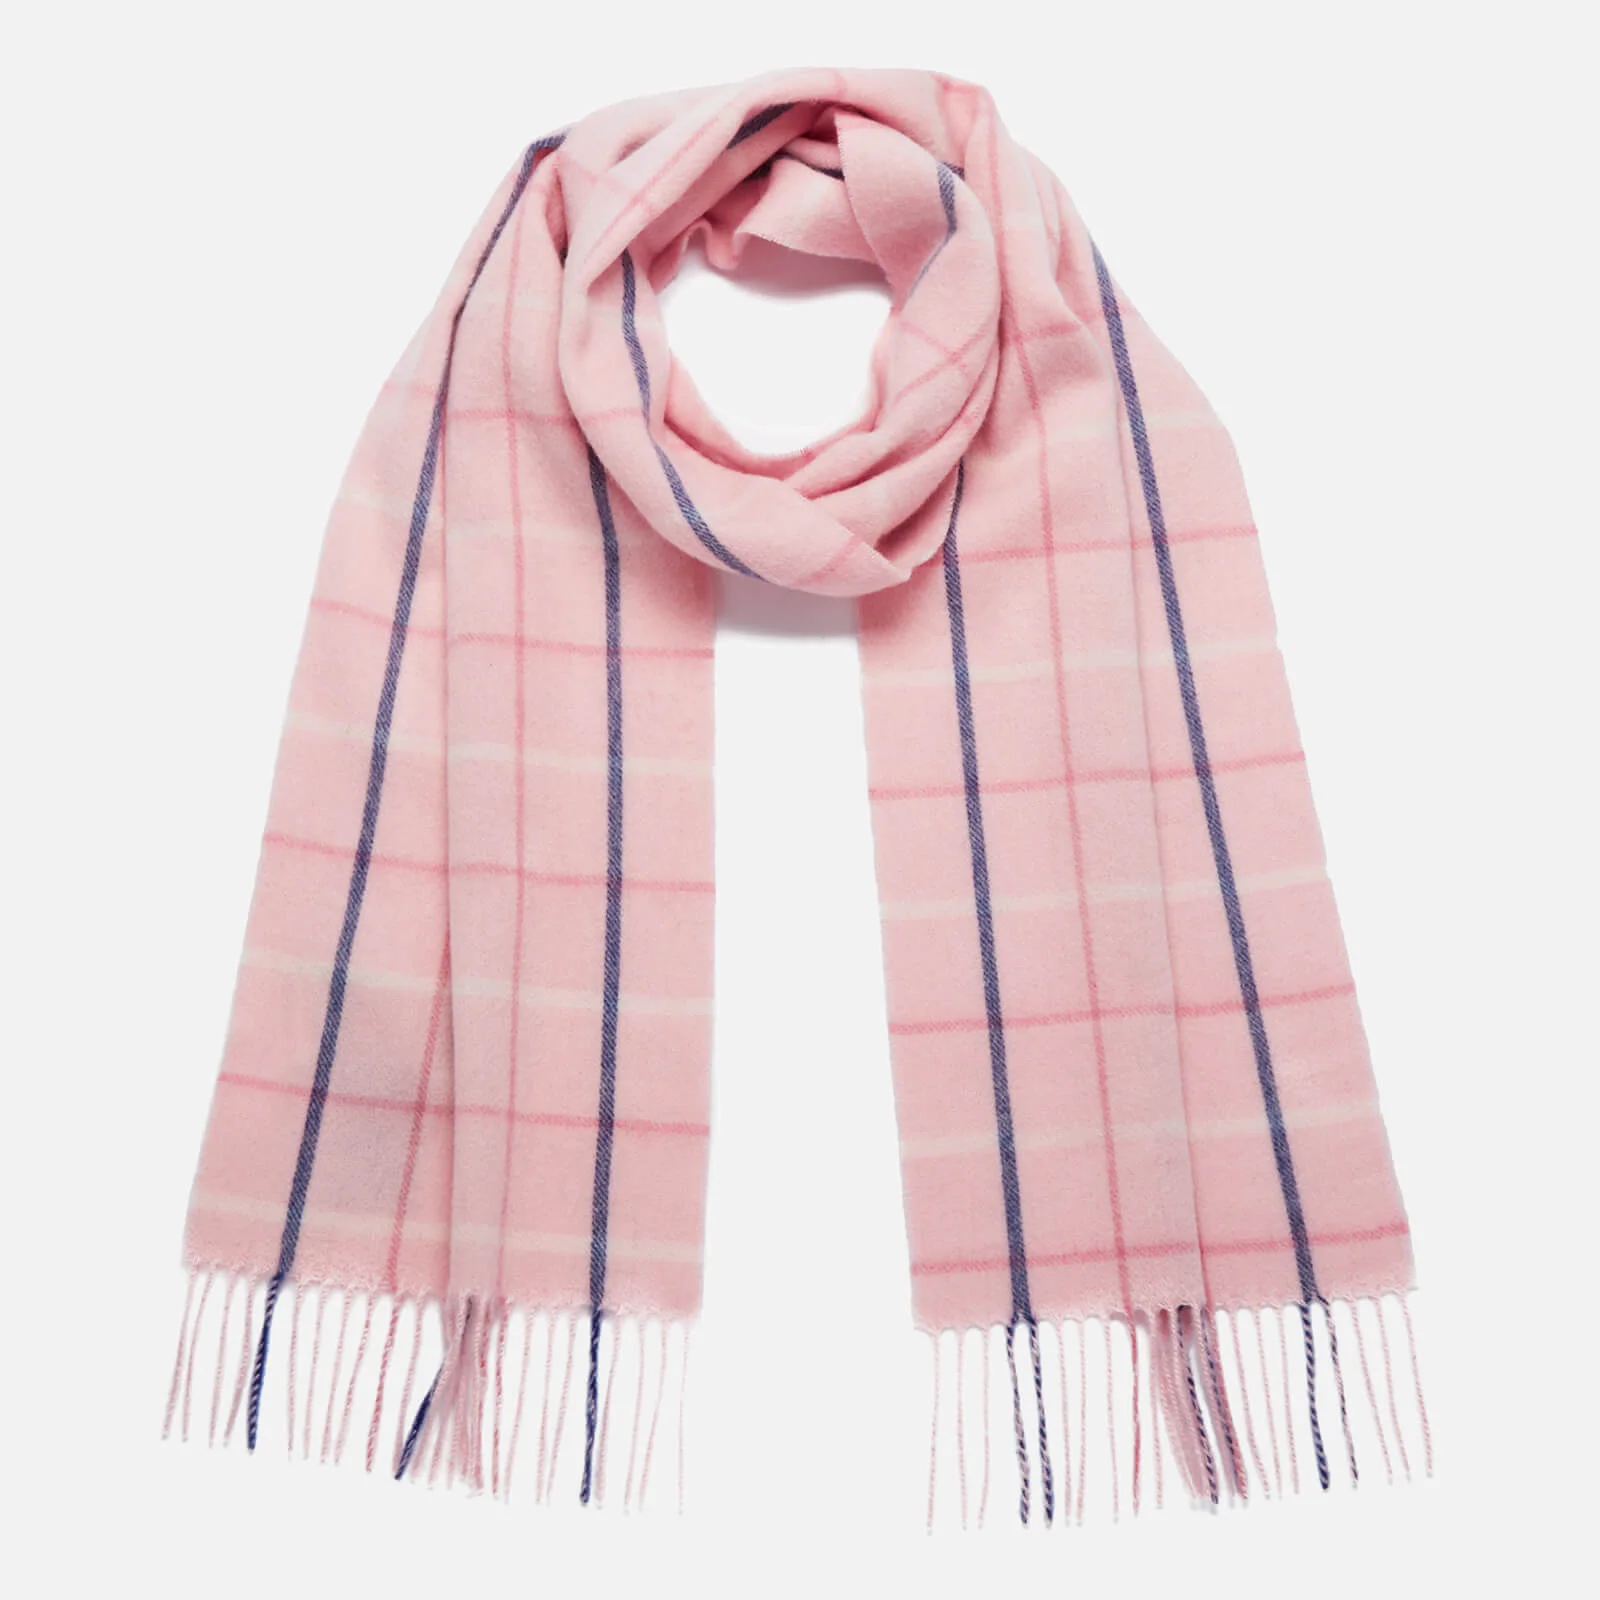 Barbour Women's Country Tattersall Scarf - Pink Plaid Image 1